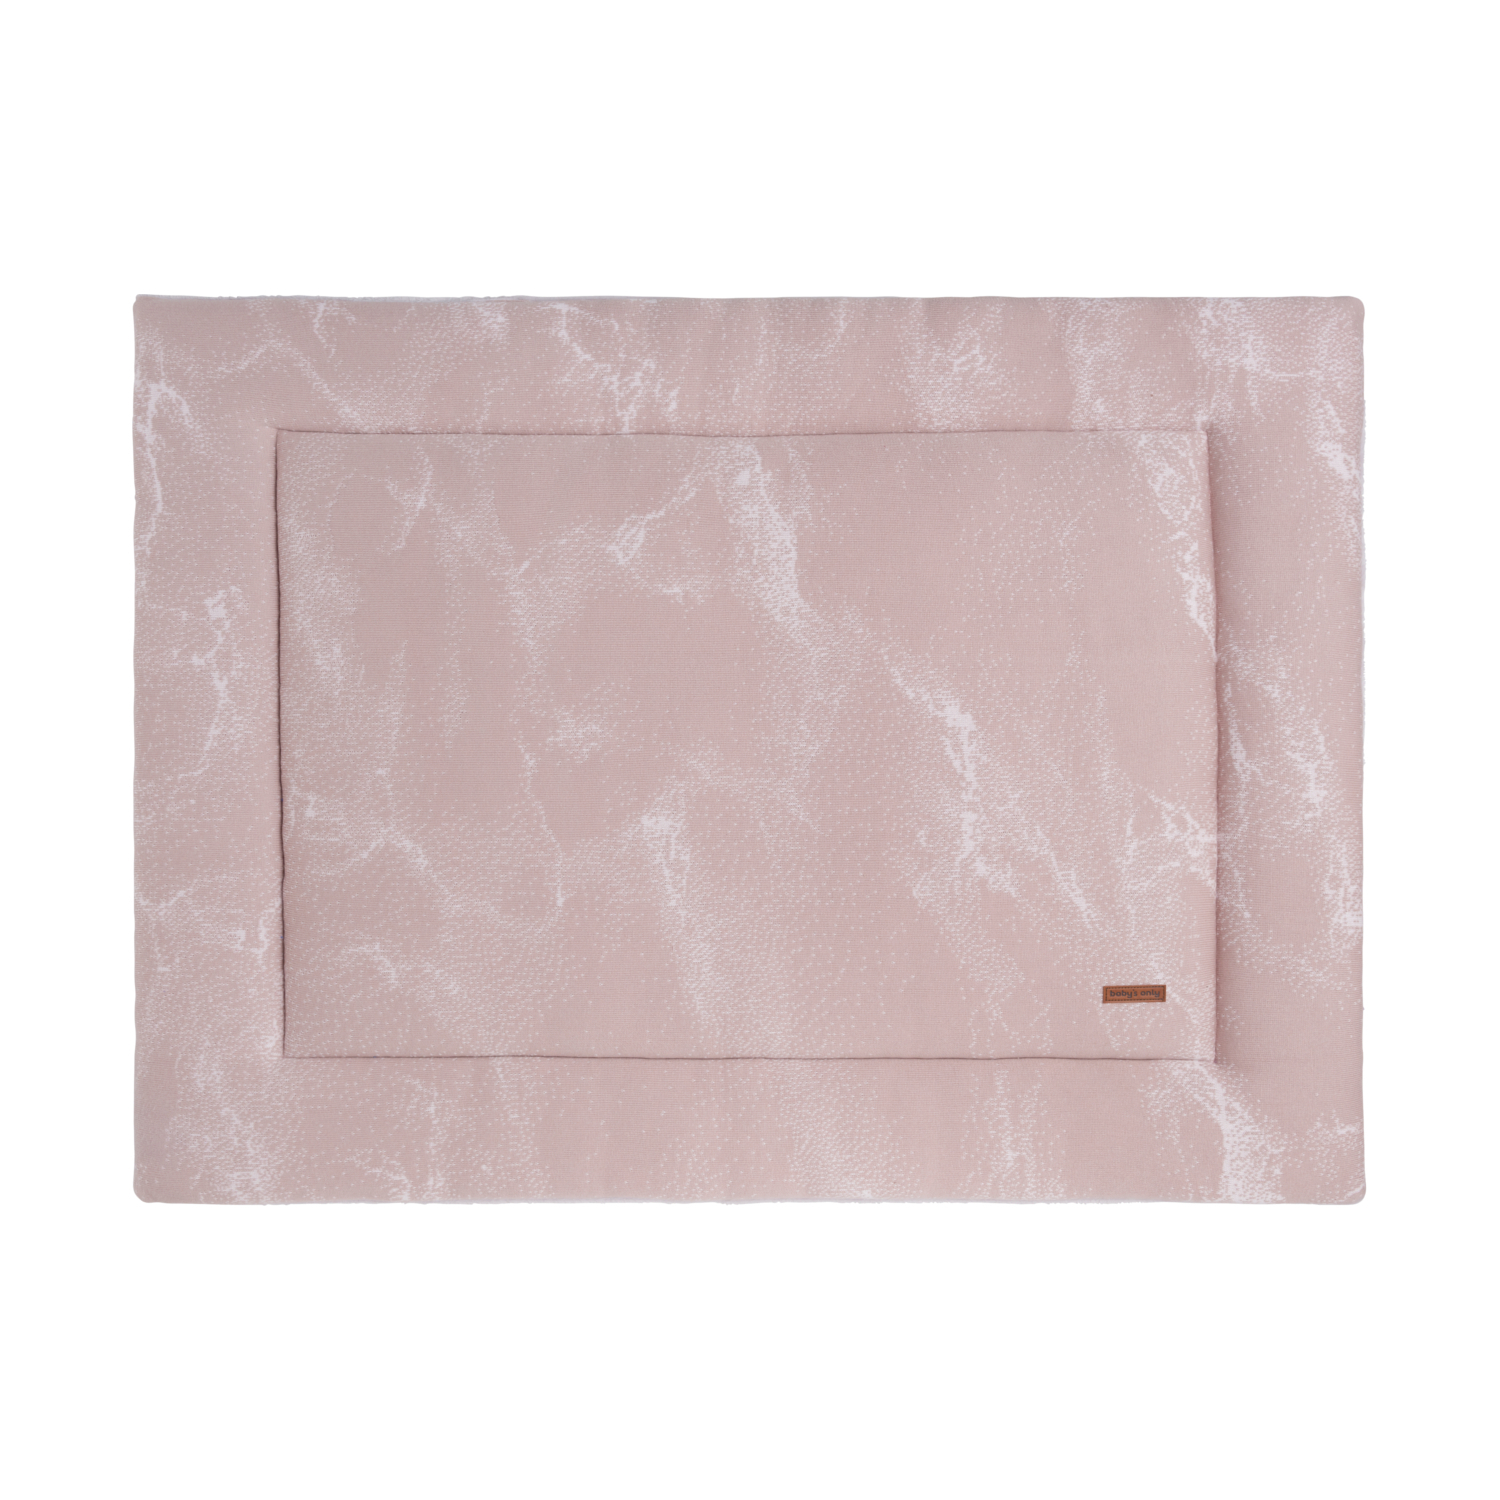 Baby's Only Marble Boxkleed Oudroze / Classic Roze 85 x 100 cm